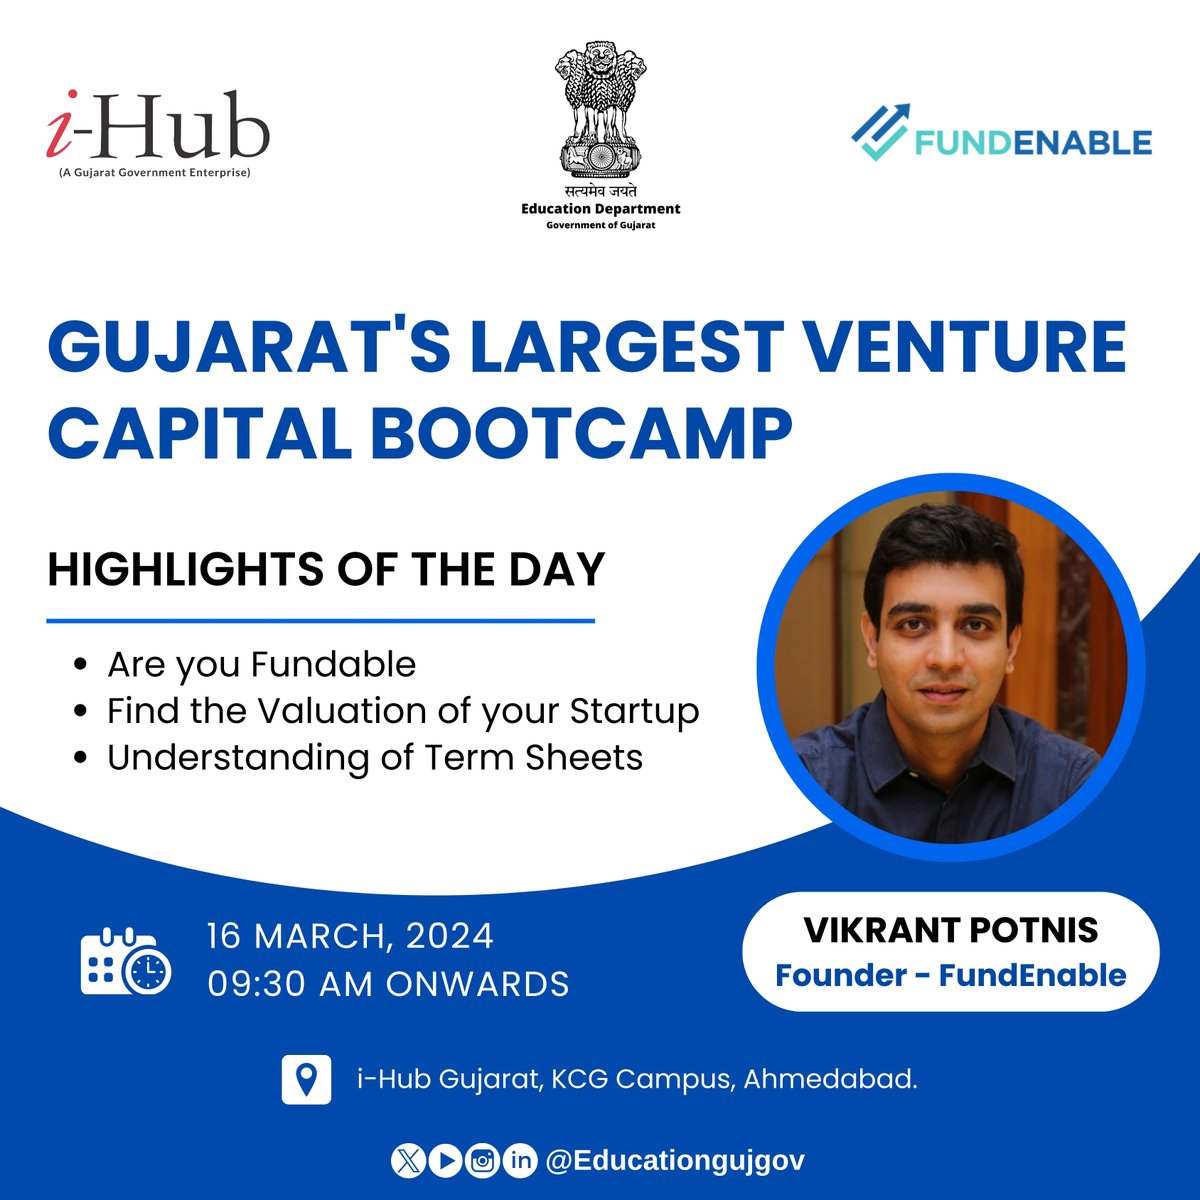 Gear up and come down to i-Hub Today for Gujarat's Largest Venture Capital Bootcamp. Date: 16/03/24 Time: 09:30 AM Onwards Venue: i-Hub Complex #Education #ihubgujarat #innovators #GujaratInnovators #FundEnable